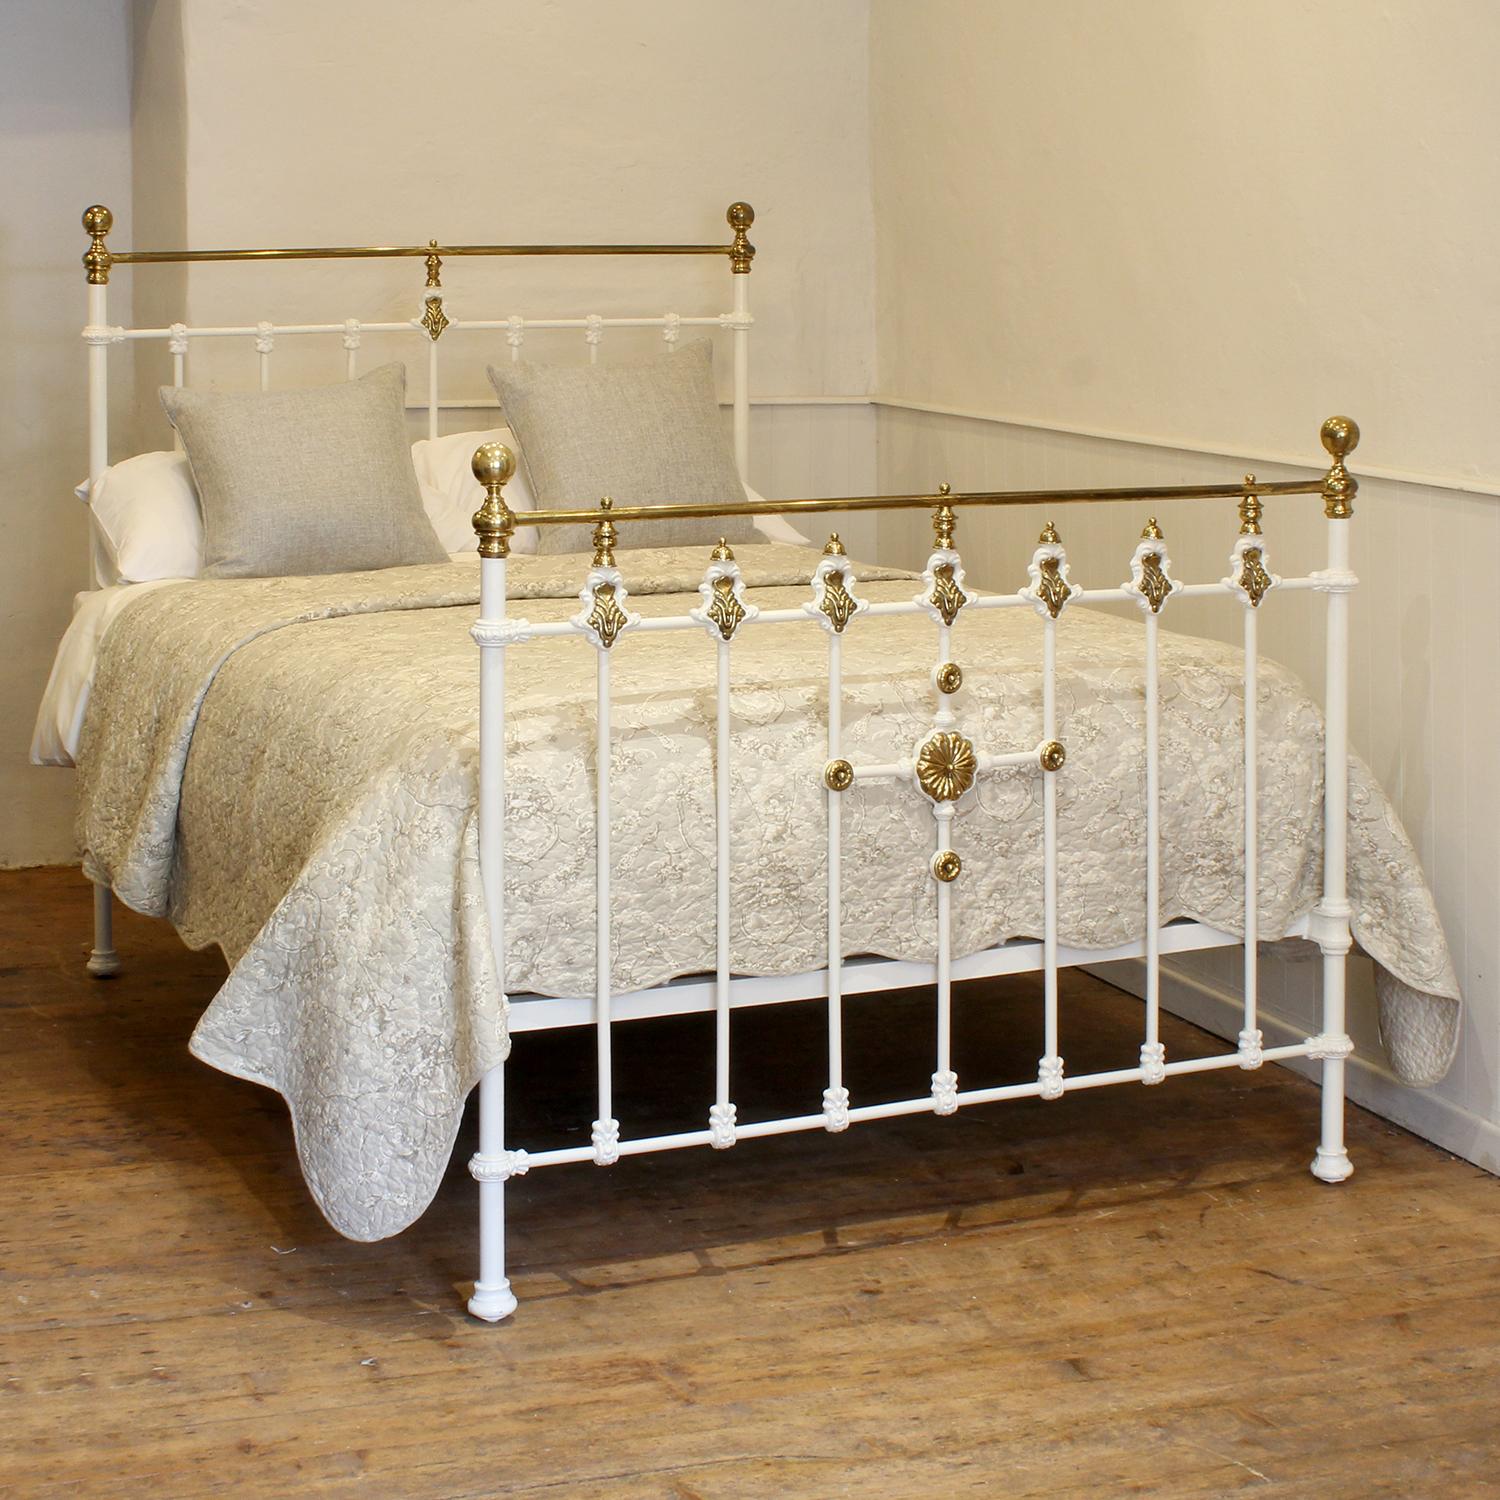 An attractive Victorian brass and cast iron bedstead finished in white with brass rosette decoration.

This bed accepts a double size 4ft 6in wide (54 inch or 135cm) base and mattress. 

The price includes a firm standard bed base to support the